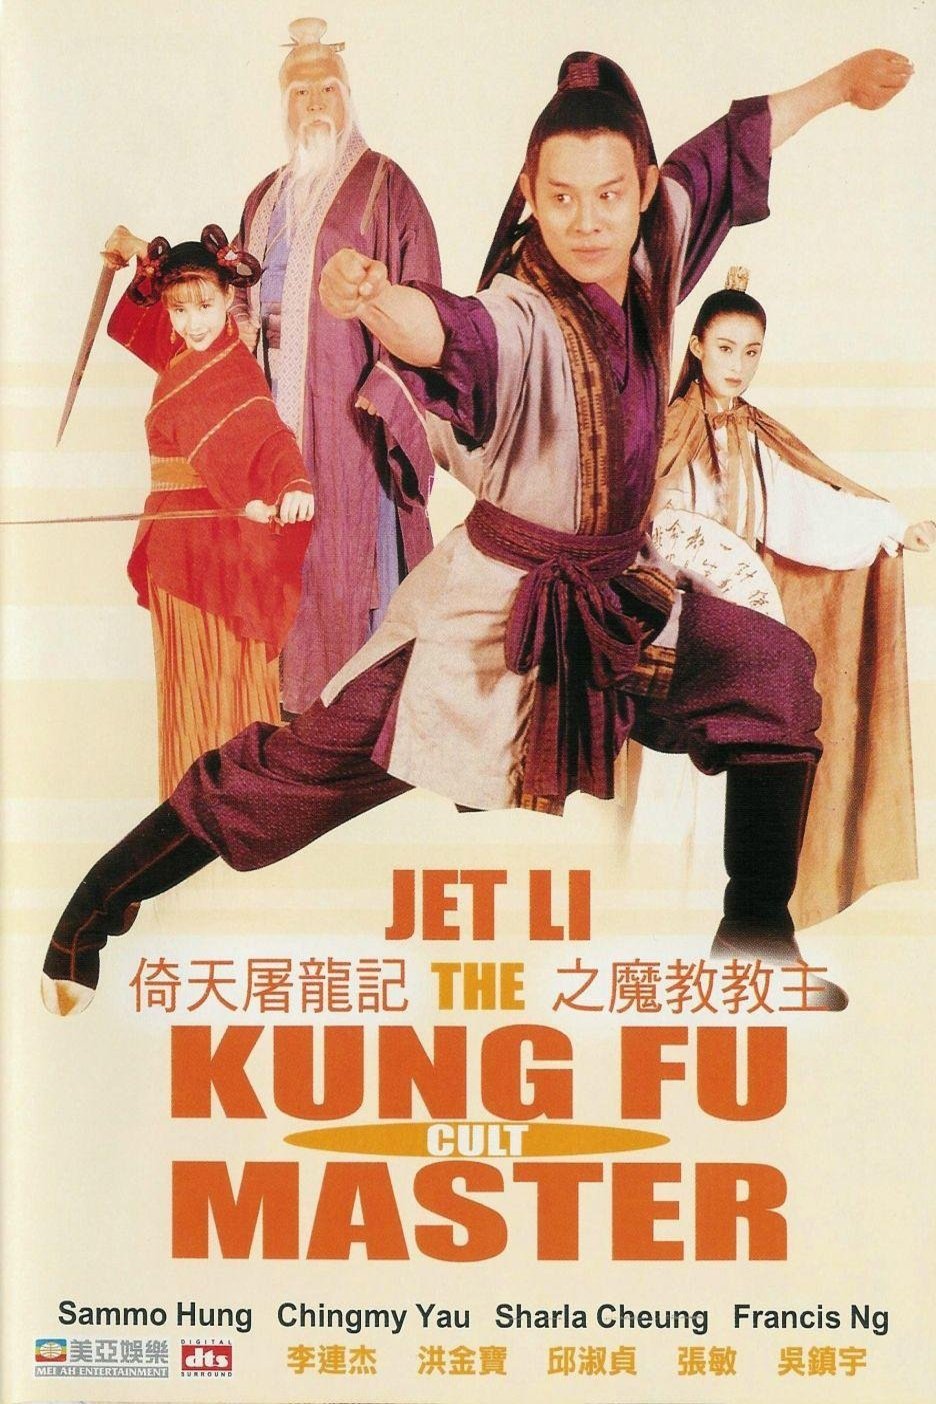 Cantonese poster of the movie Kung Fu Cult Master